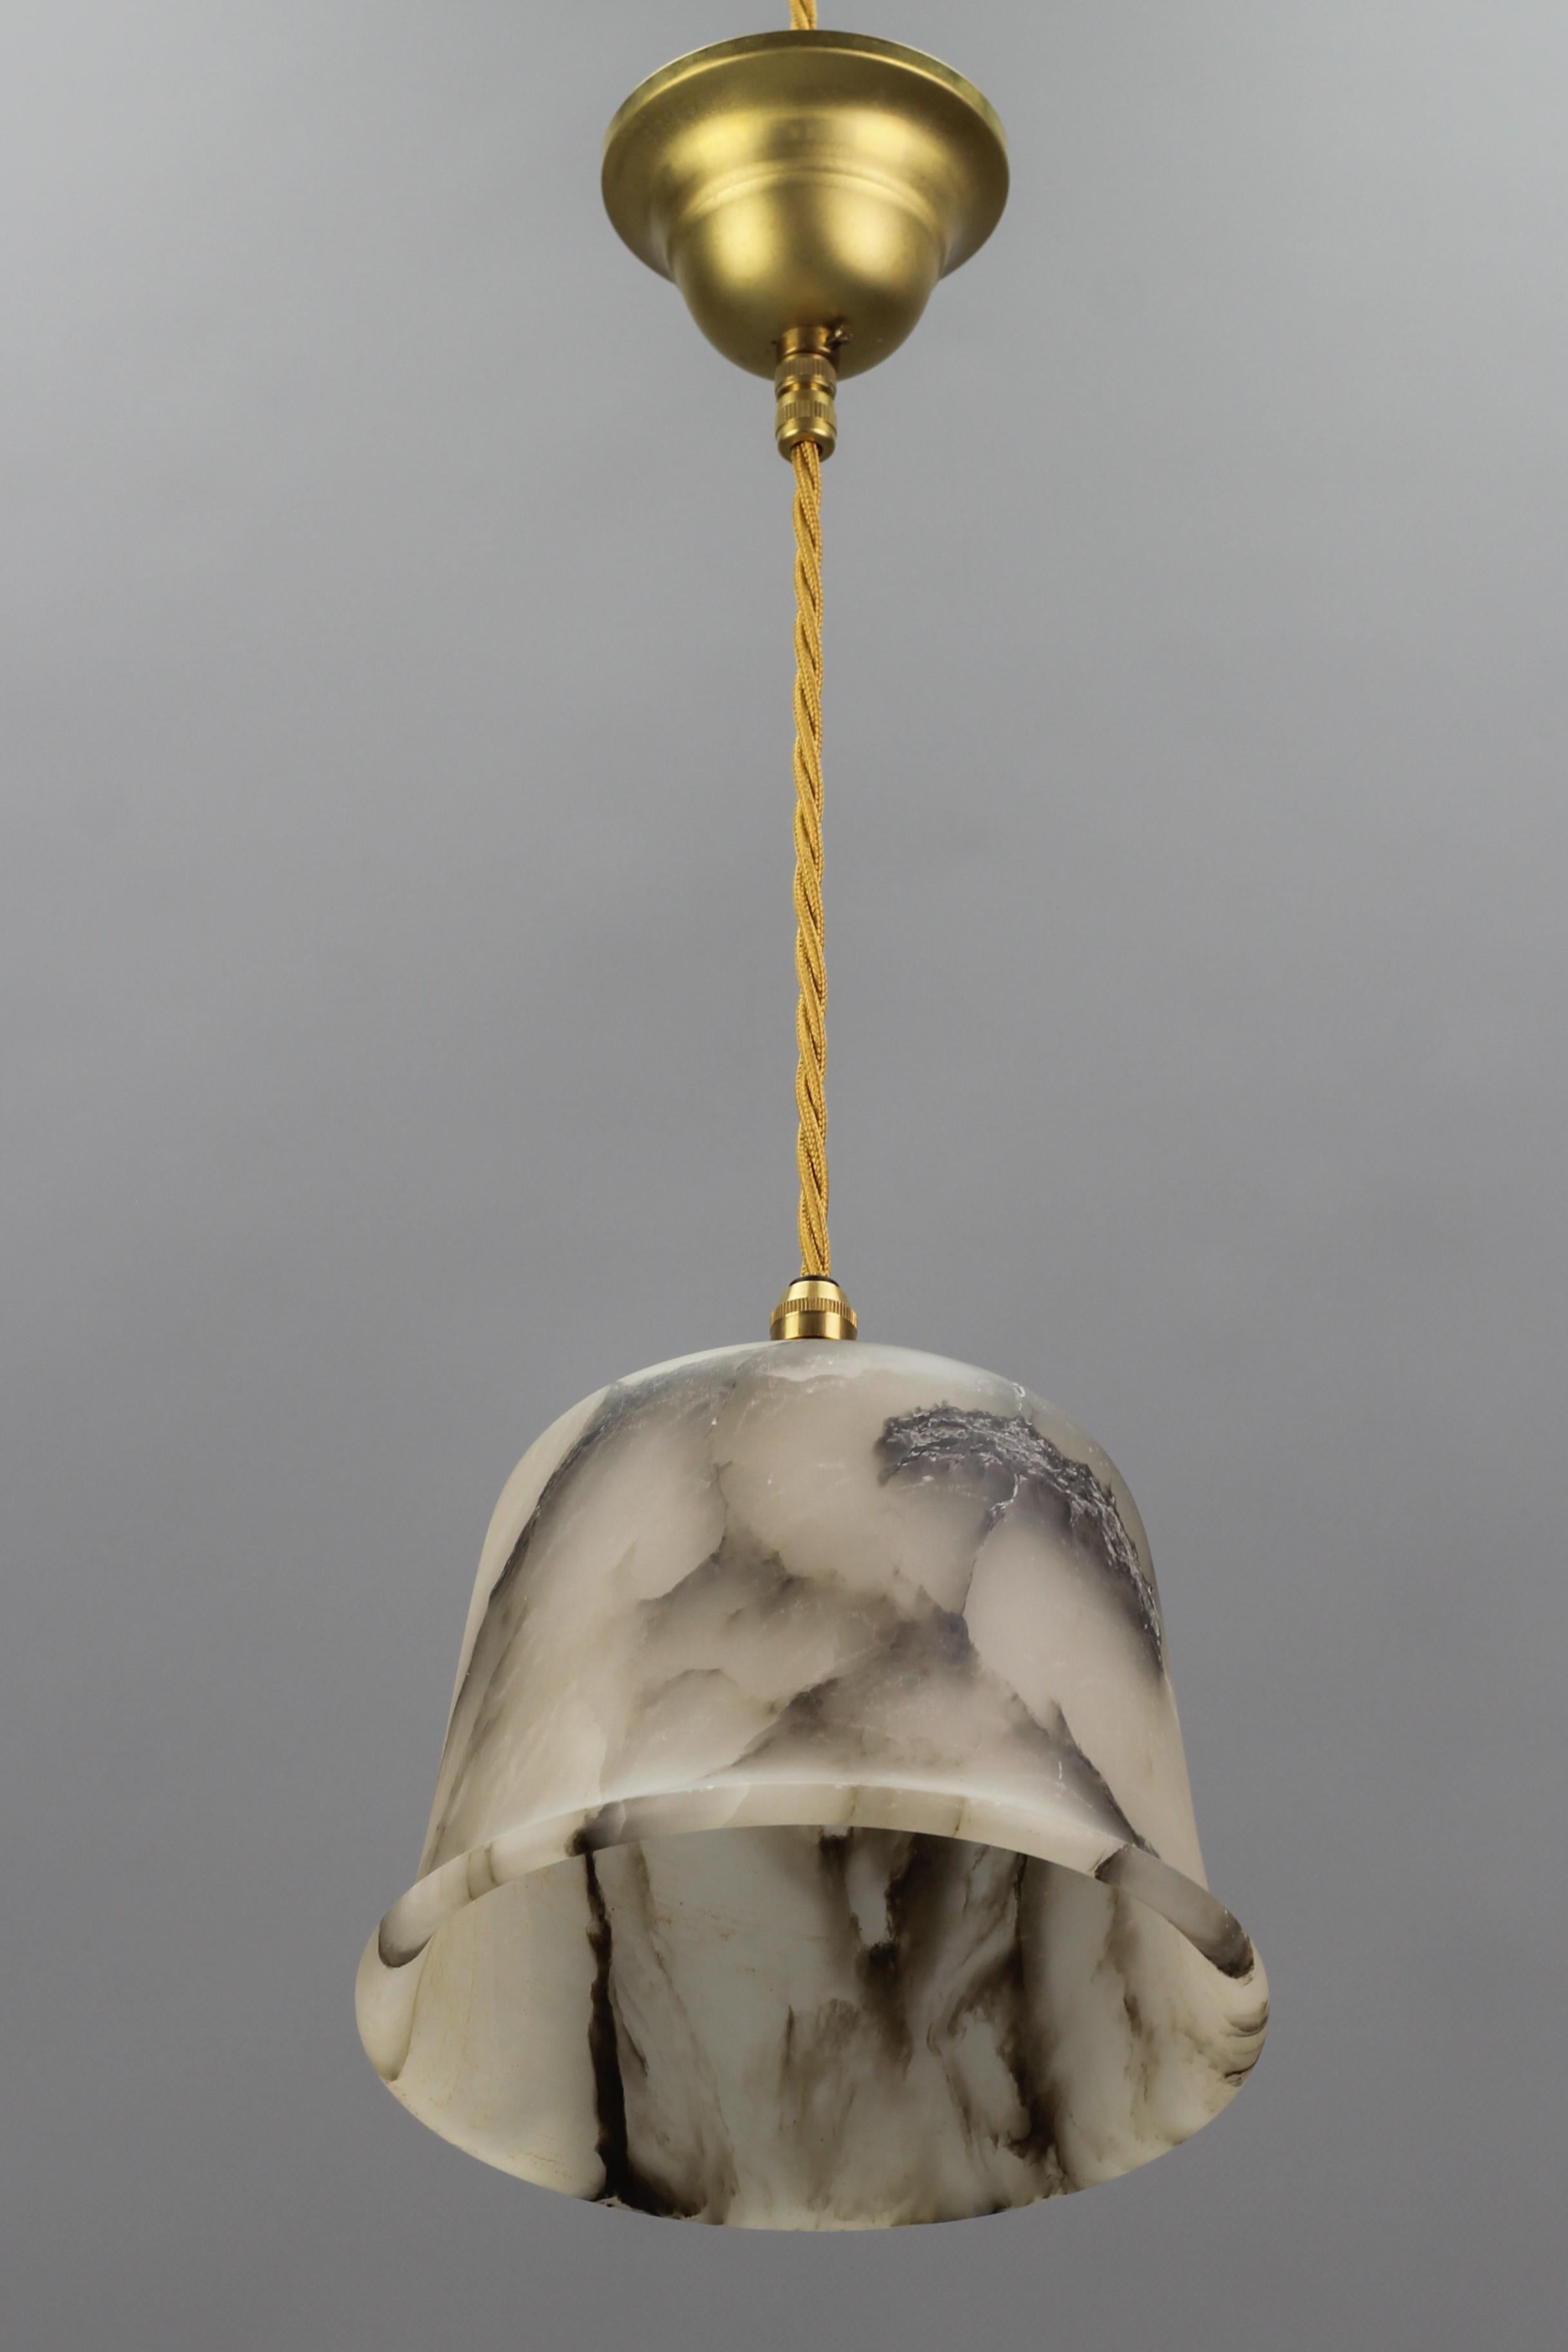 Adorable and compact Art Deco alabaster pendant light.
The beautifully veined white and black alabaster lampshade is suspended from a brass canopy. The light shining through the white stone with dark brown and black veins is warm and atmospheric,